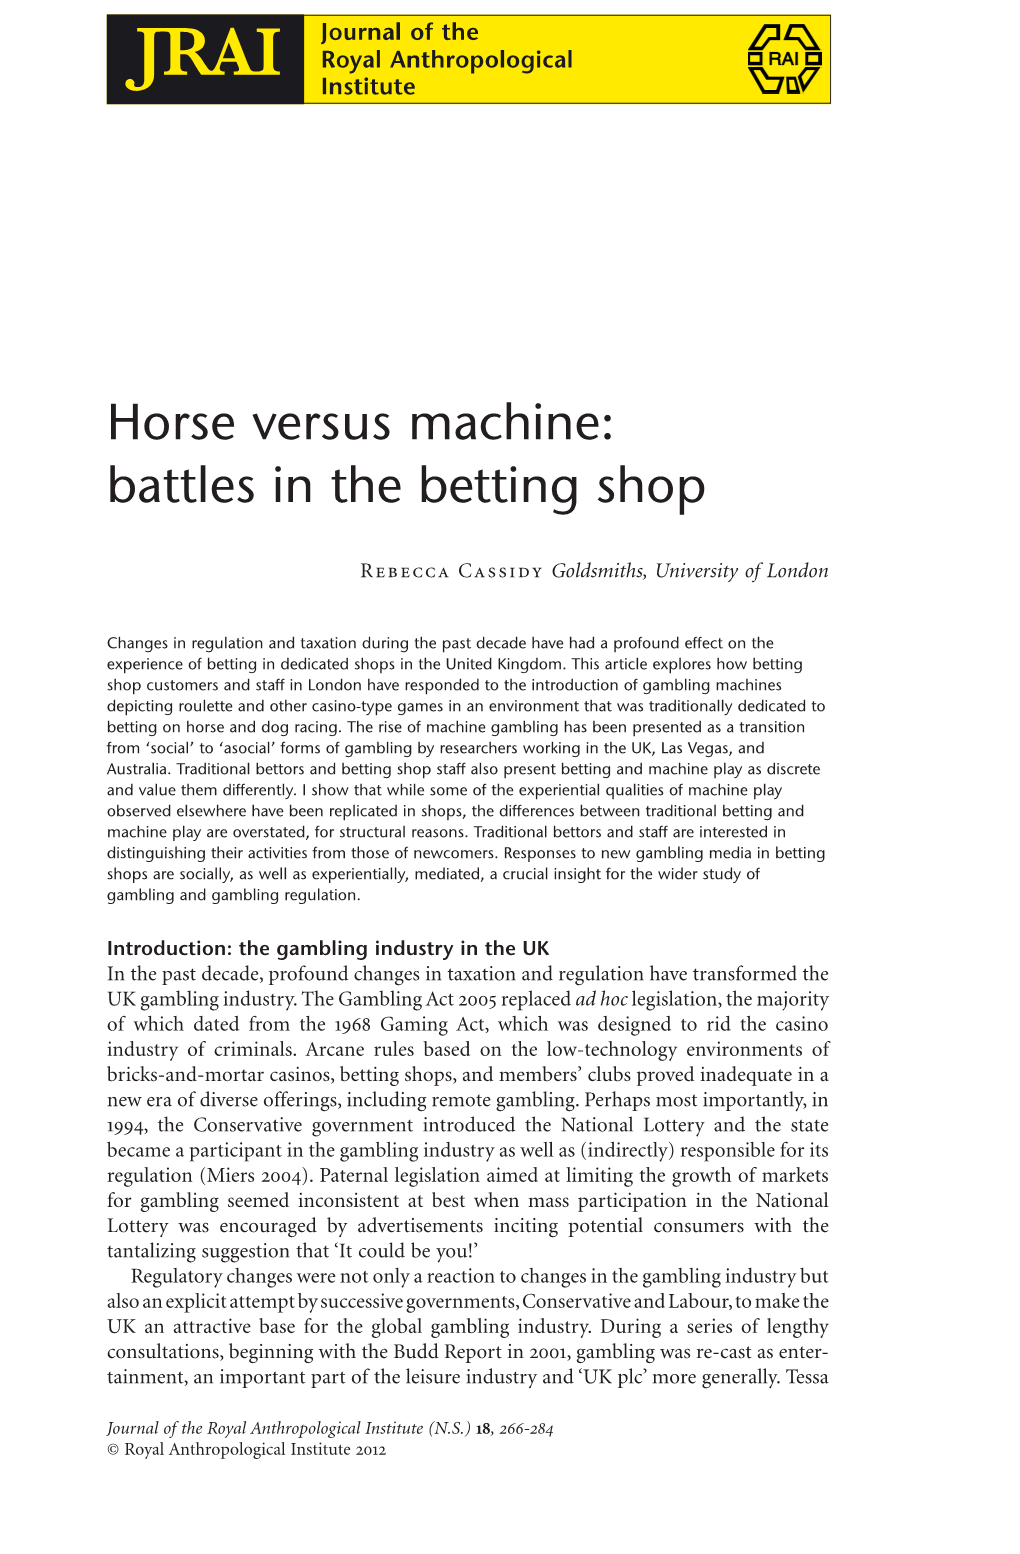 Battles in the Betting Shop